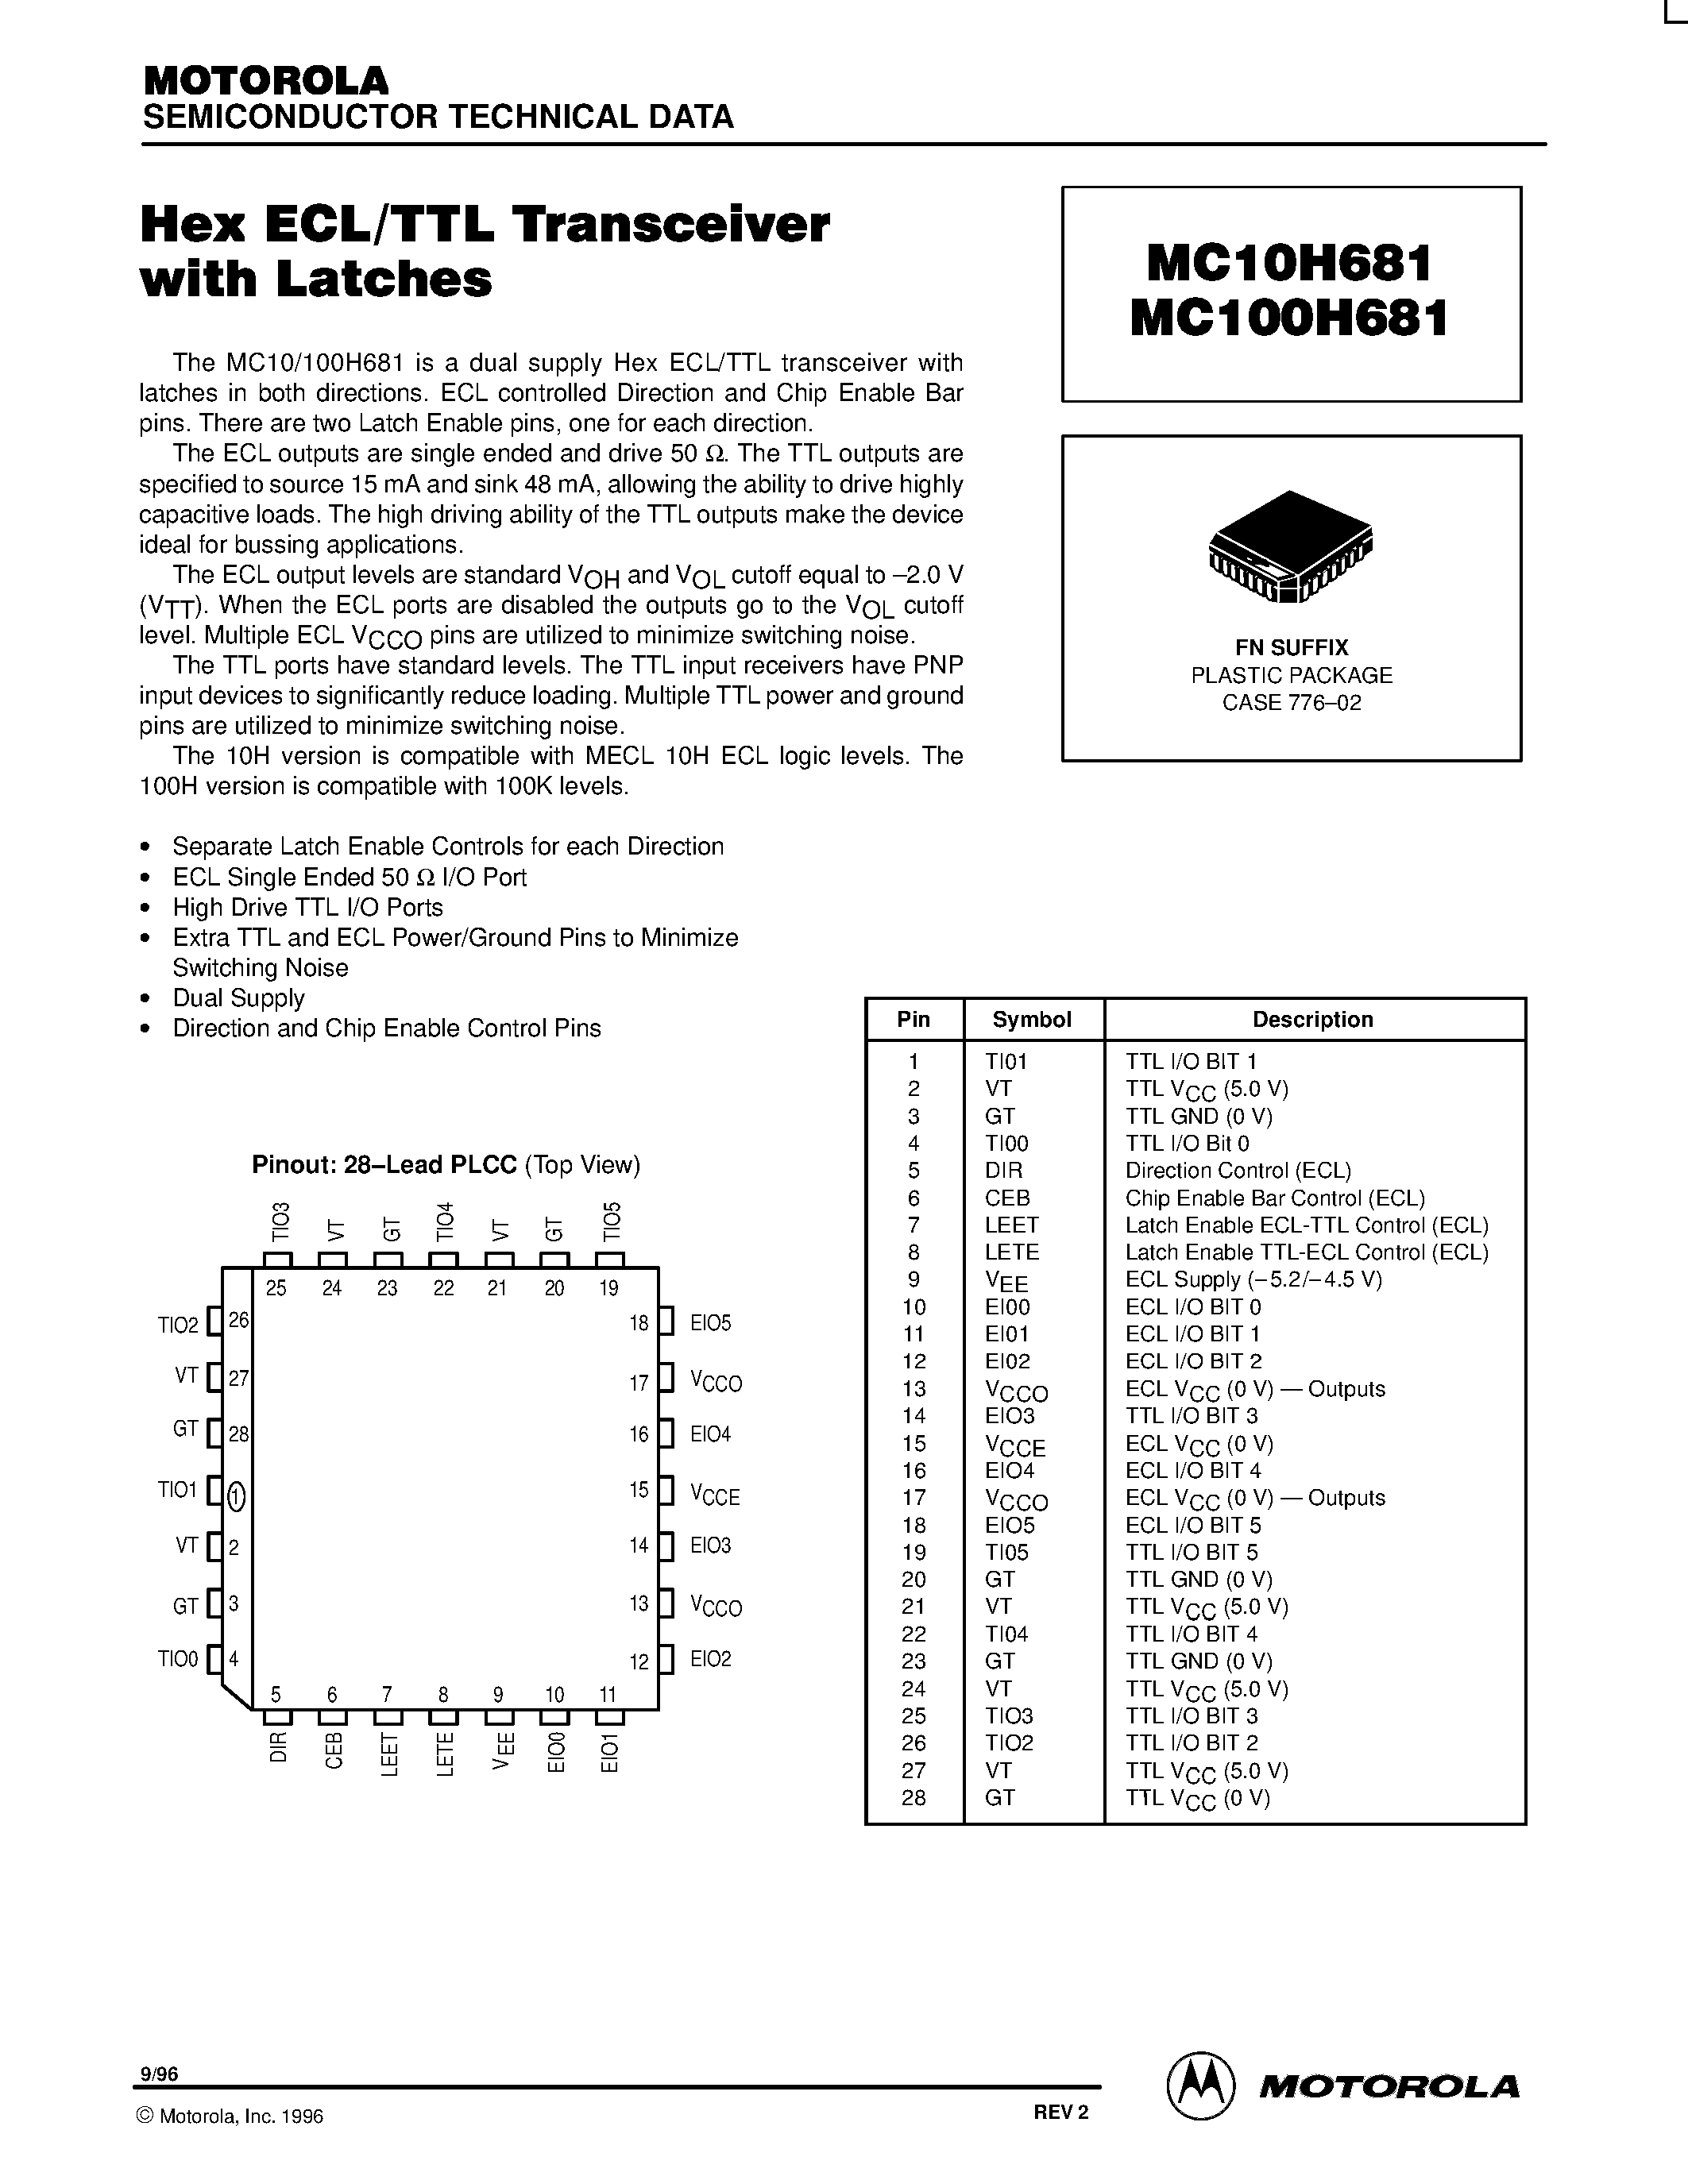 Datasheet MC10H681FN - Hex ECL/TTL Transceiver with Latches page 1